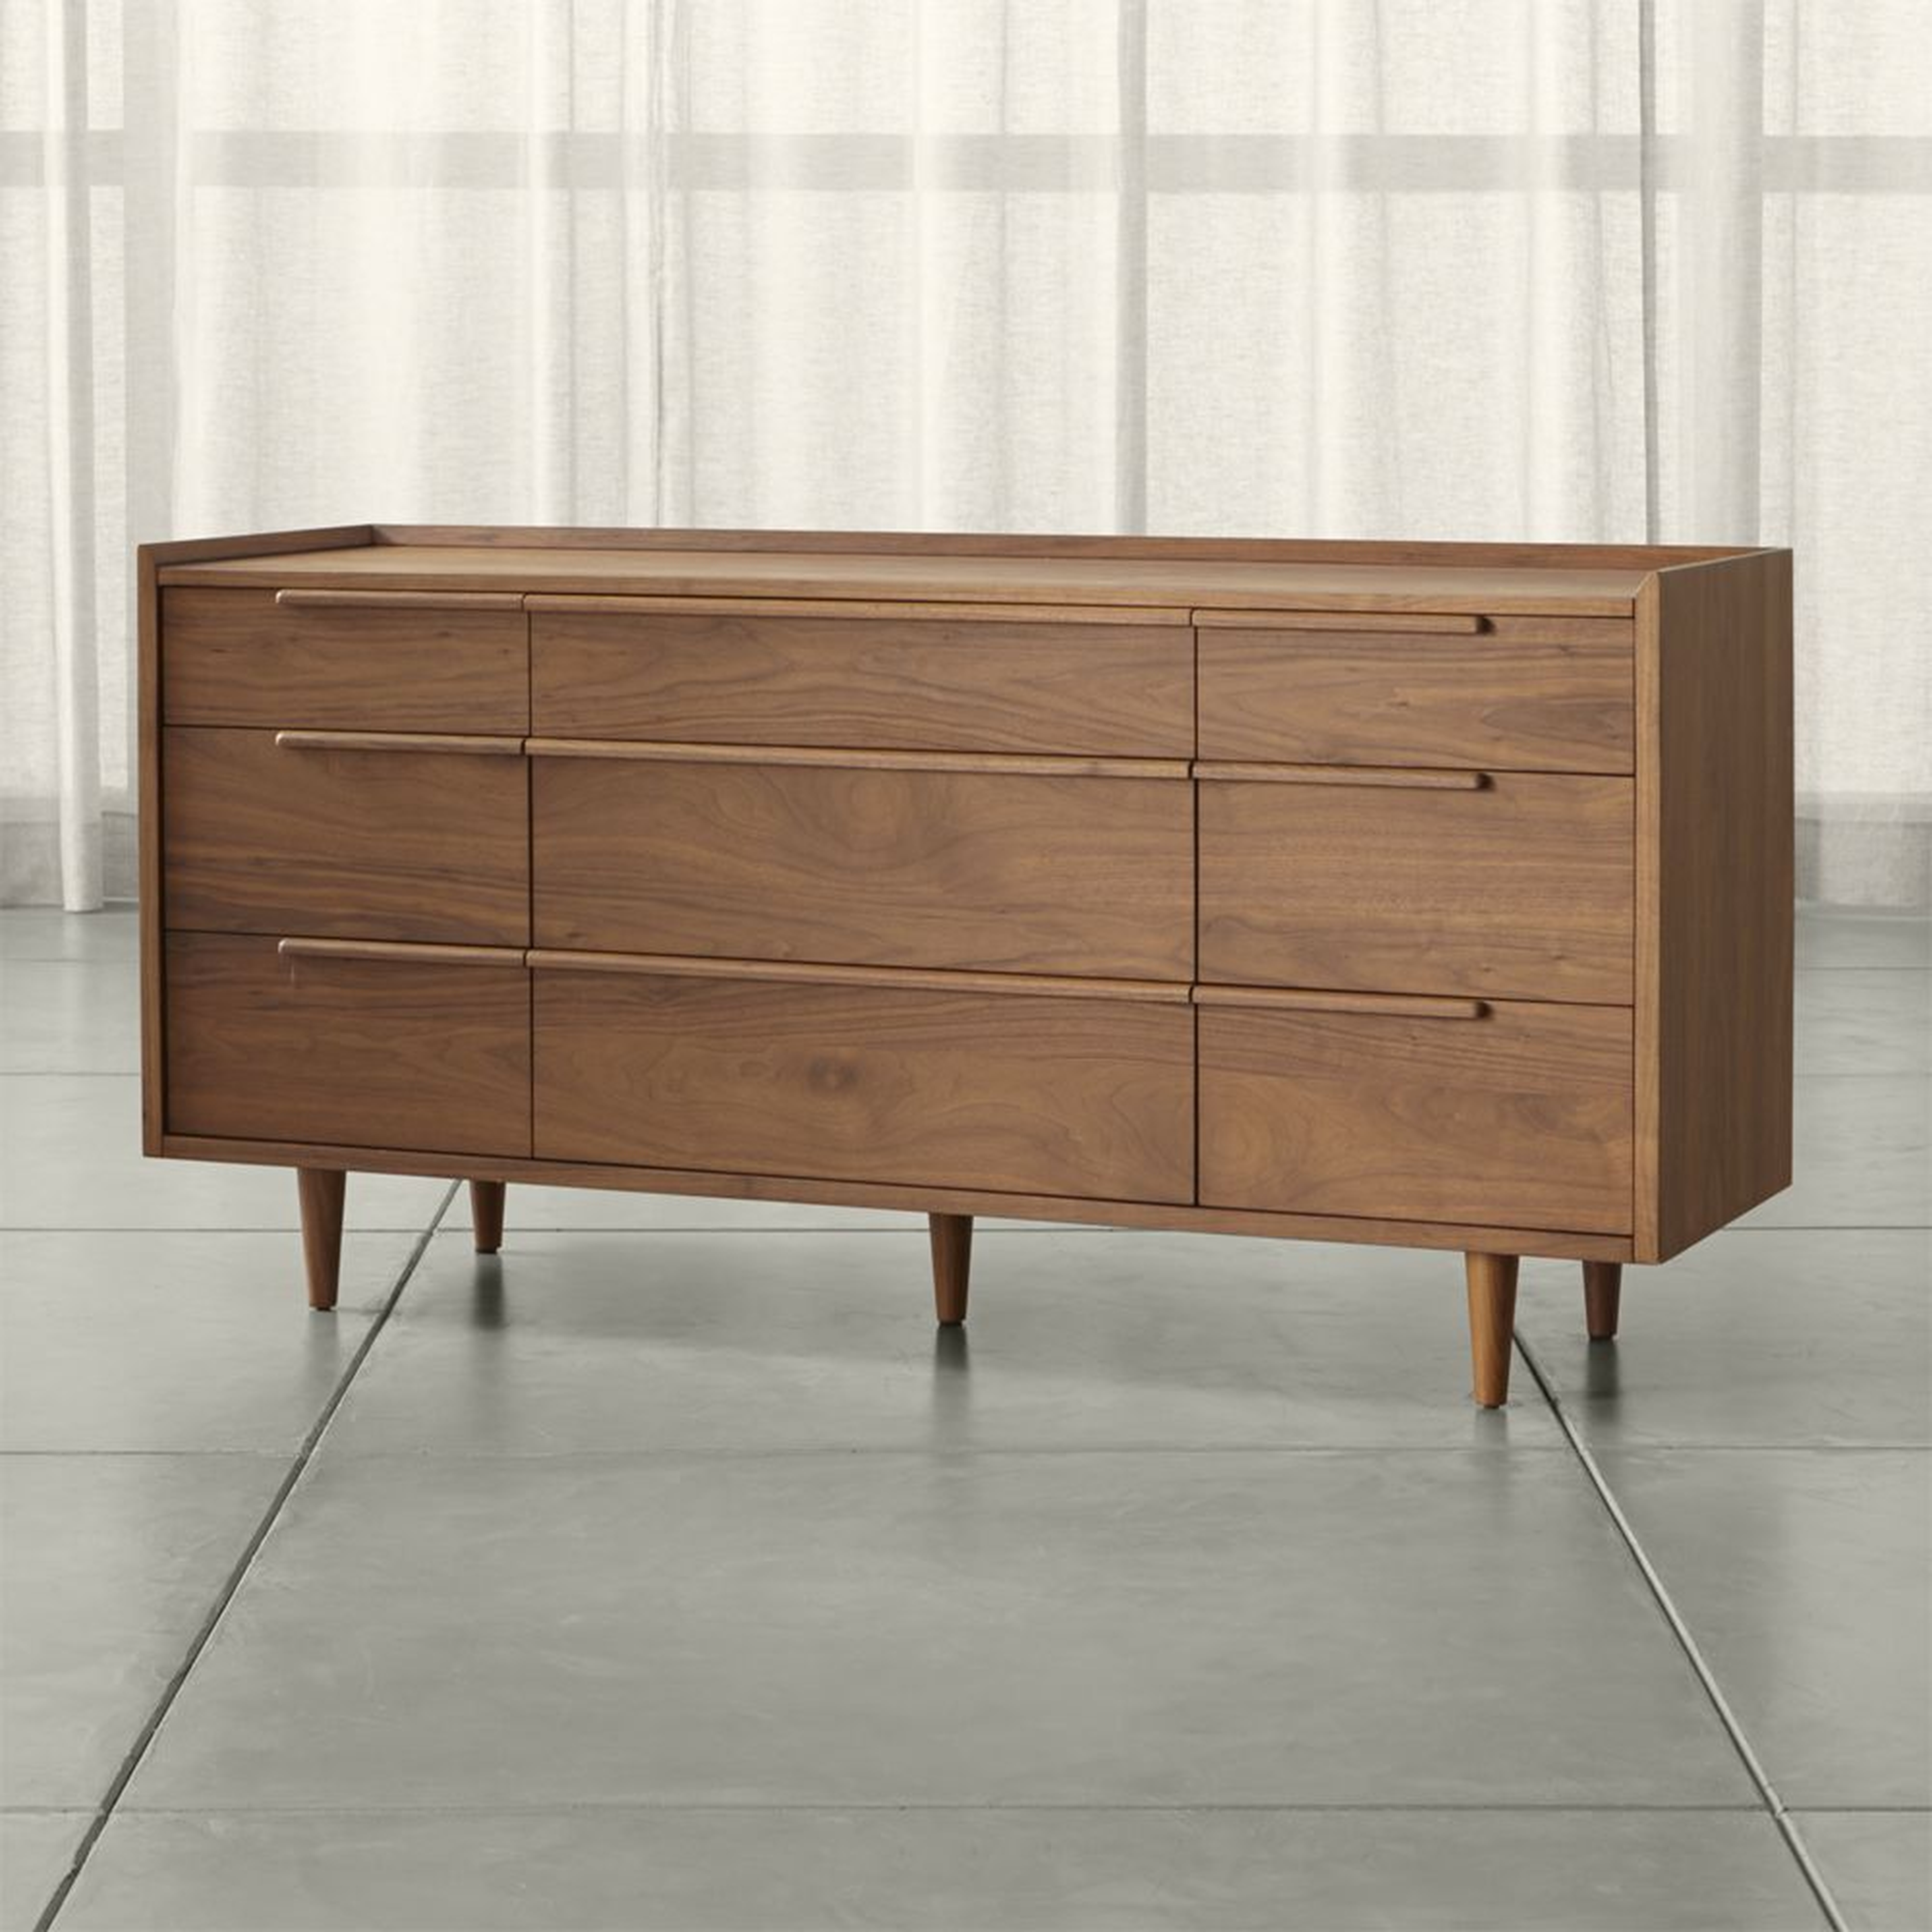 Tate 9-Drawer Dresser (Mid-August) - Crate and Barrel